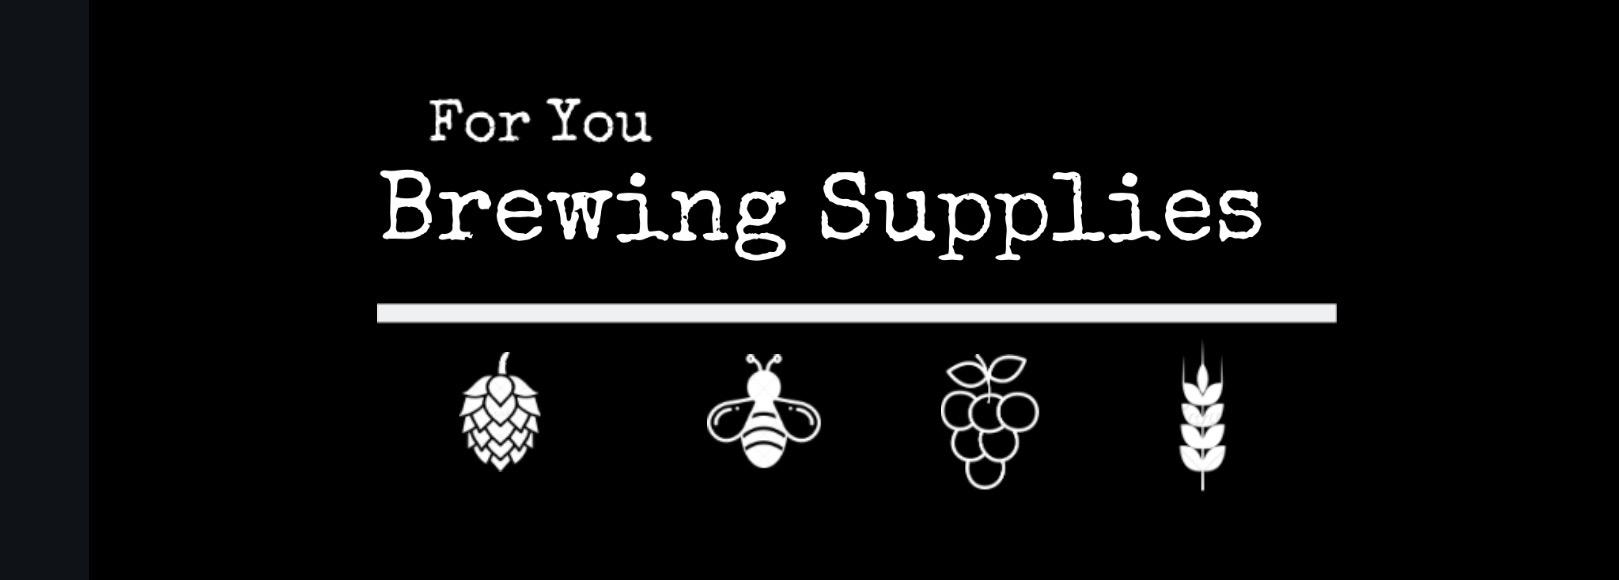 For You Brewing Supplies